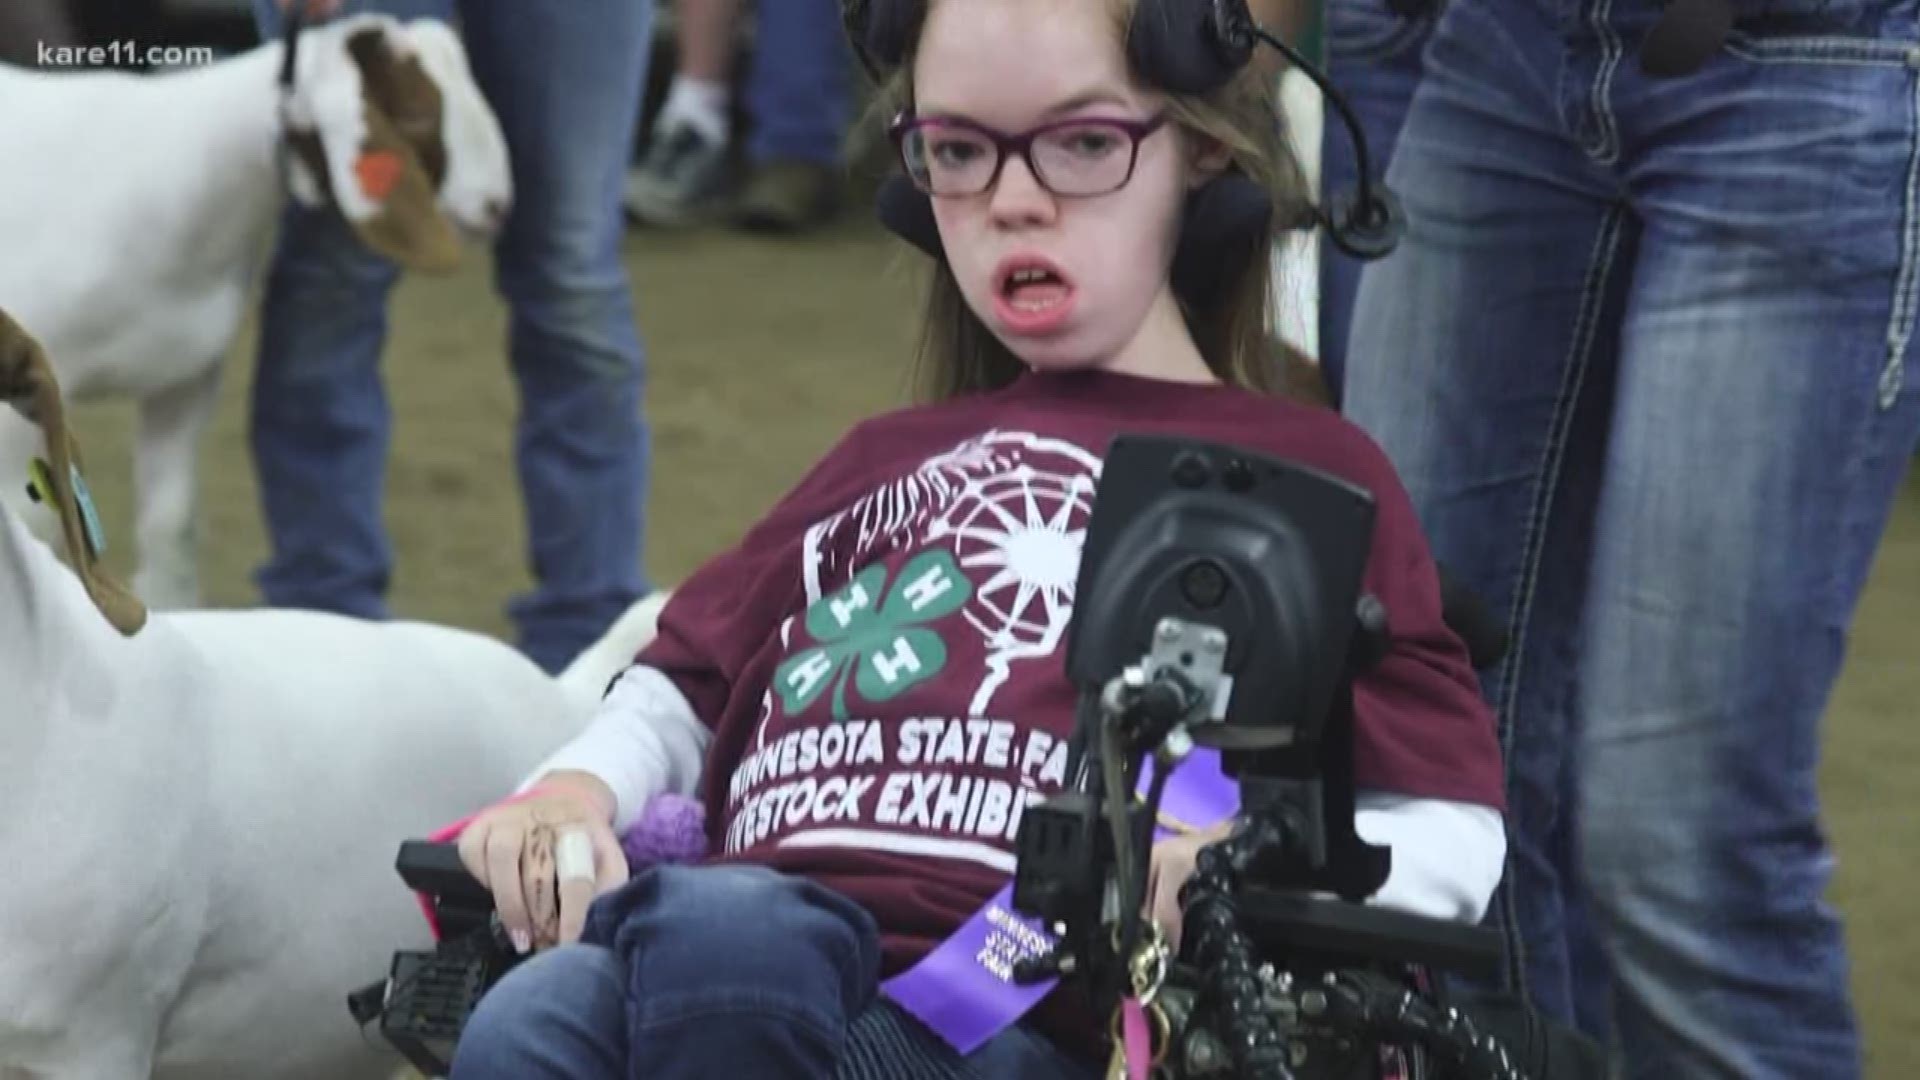 From art to livestock, there is a lot of outstanding work on display at the Minnesota State Fair courtesy of 4H. And one girl is using the platform to challenge our ideas surrounding disabilities. Kent Erdahl has her inspiring story.